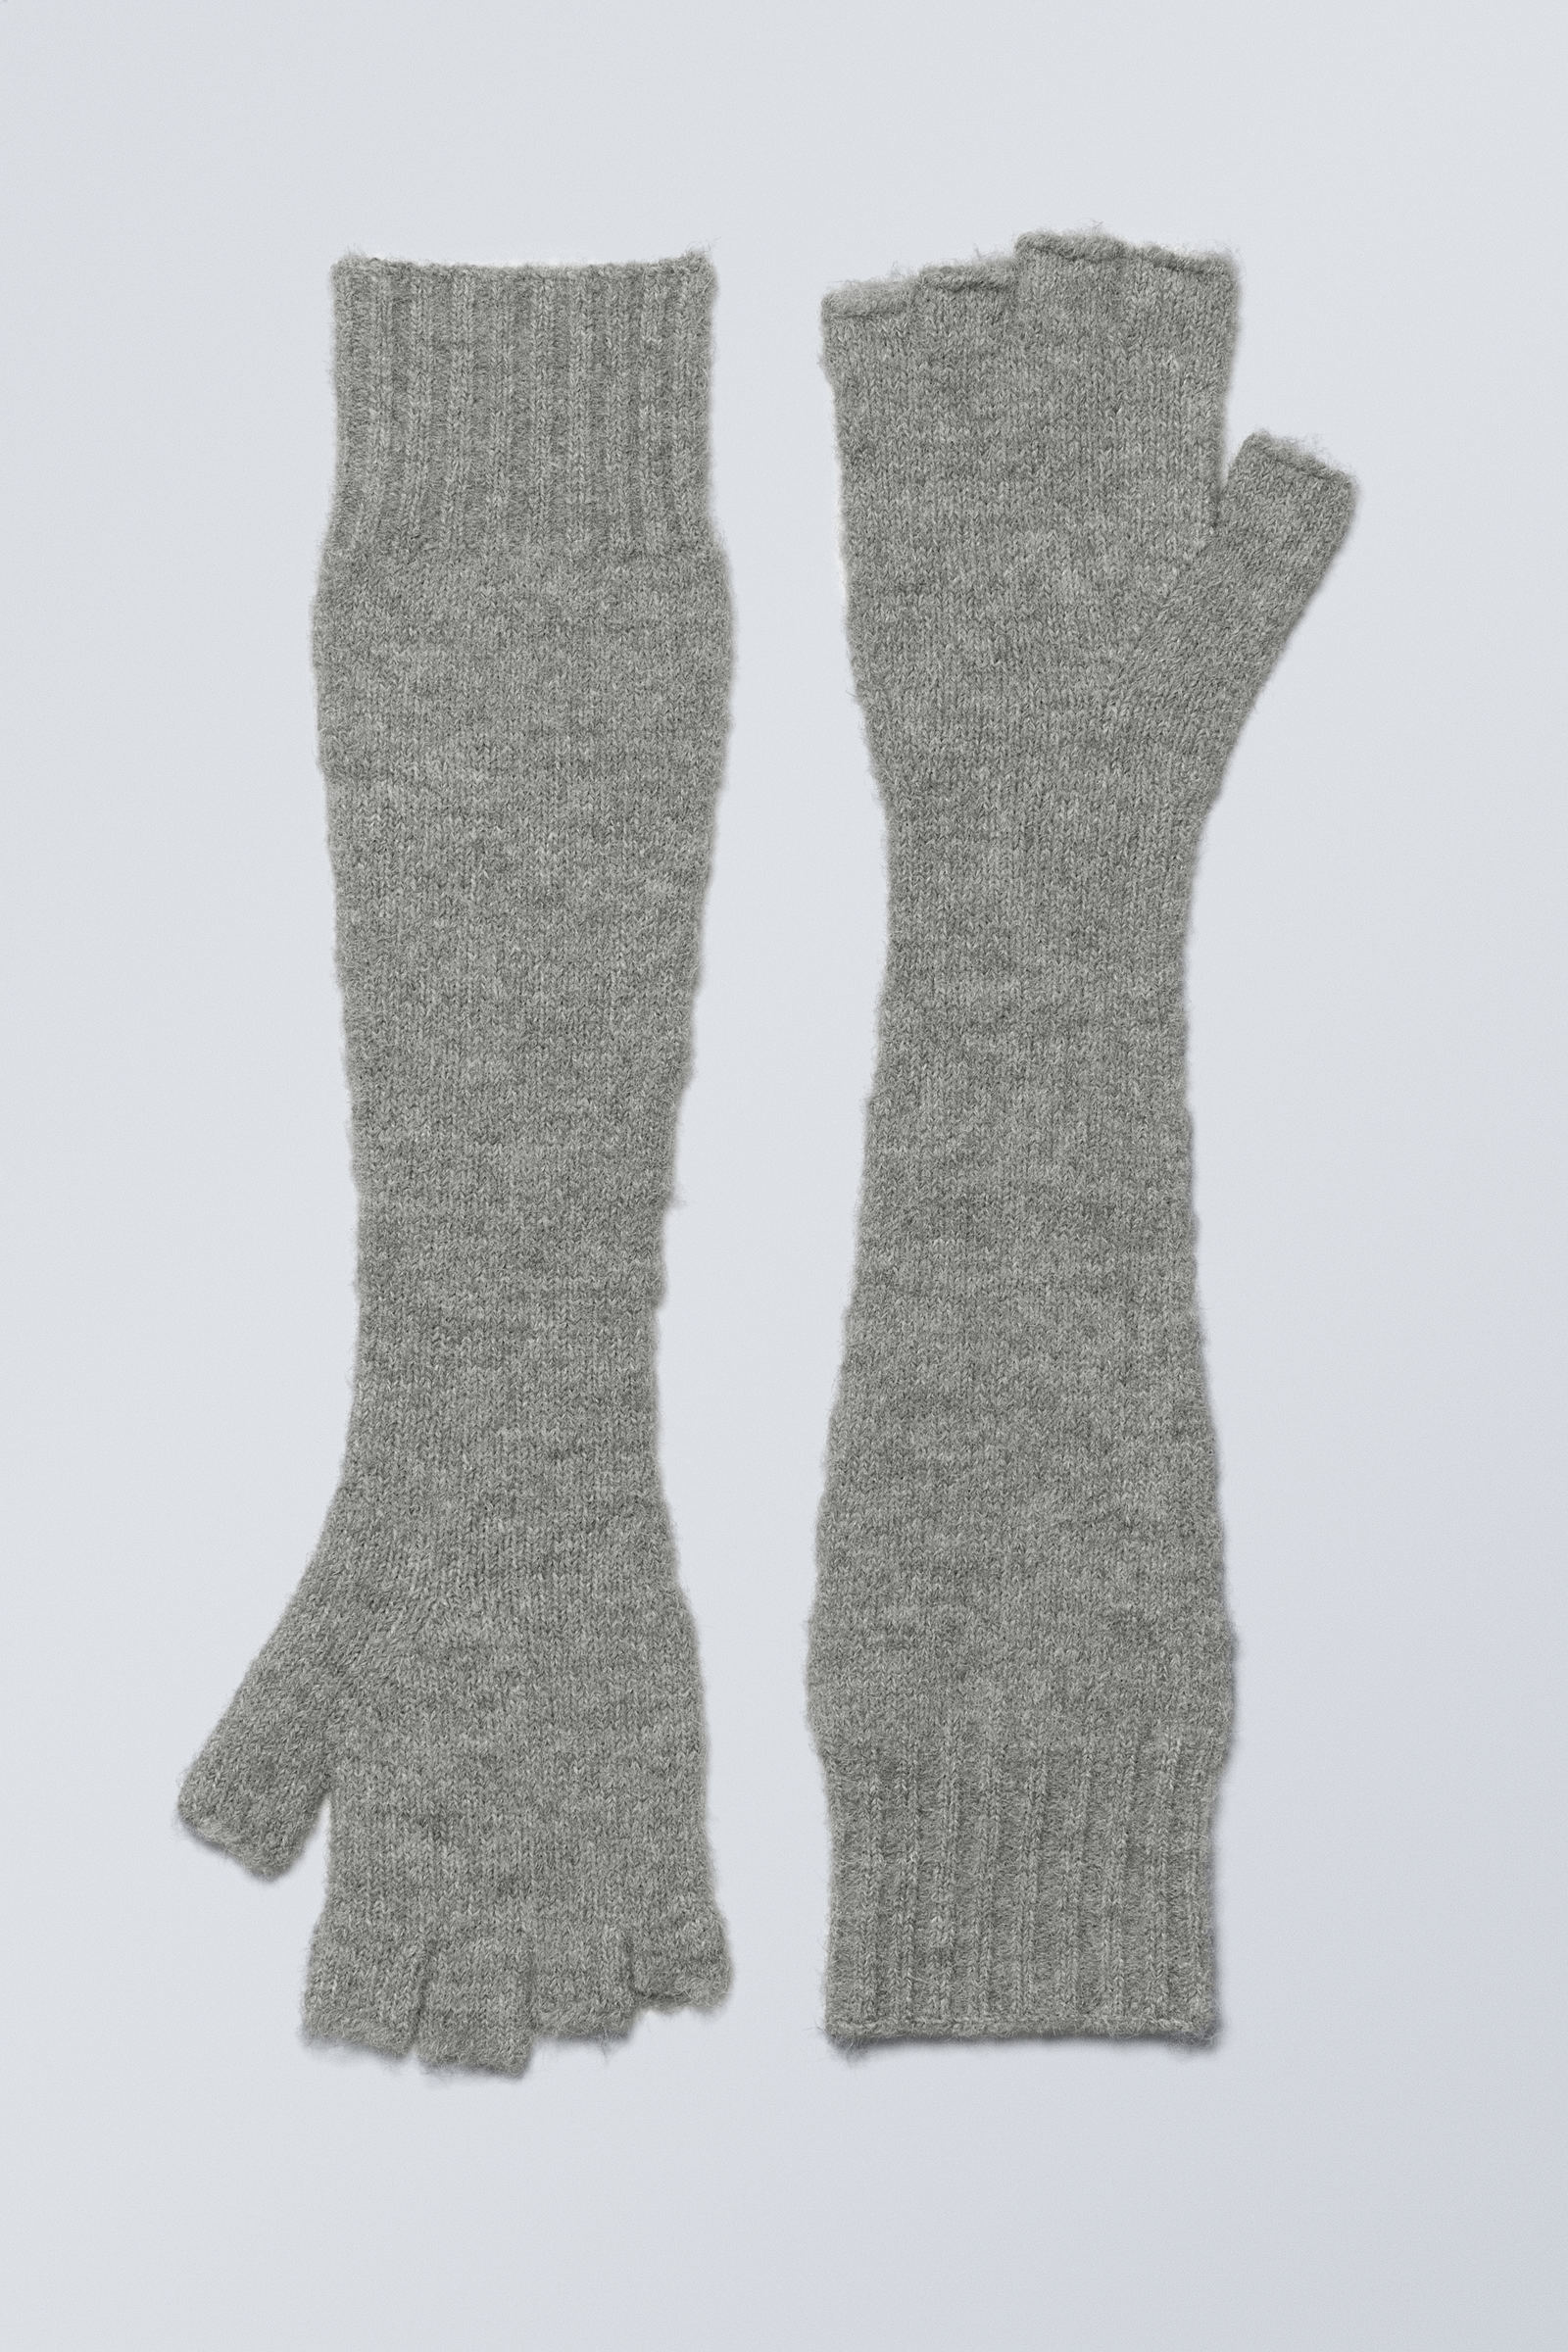 #808080 - Long Knitted Gloves